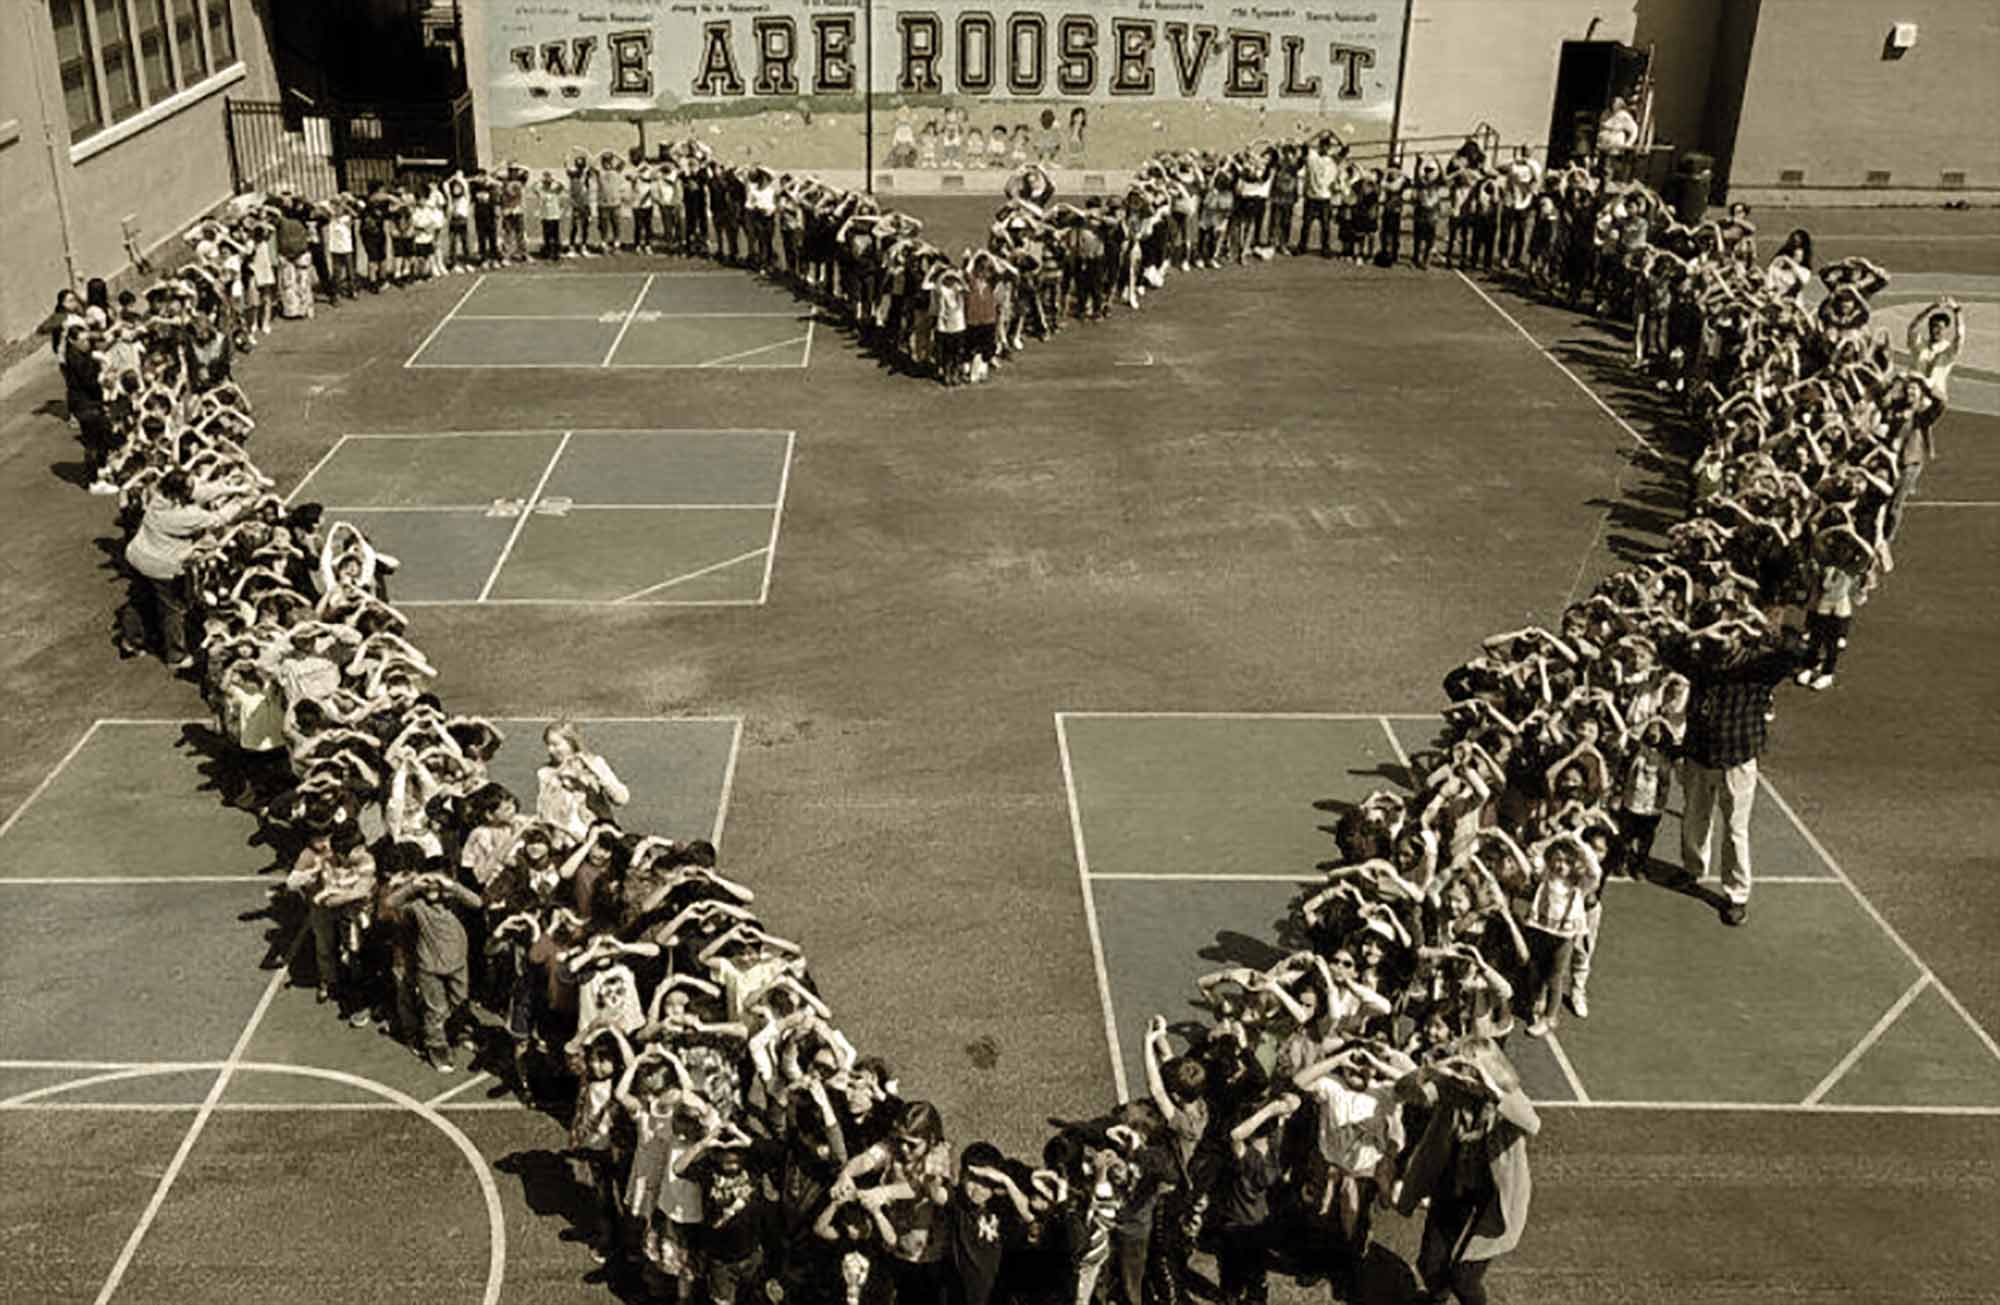 Landscape aerial photograph perspective of the Roosevelt Elementary School students standing outside with the teachers forming a heart shaped gesture in the blacktop area